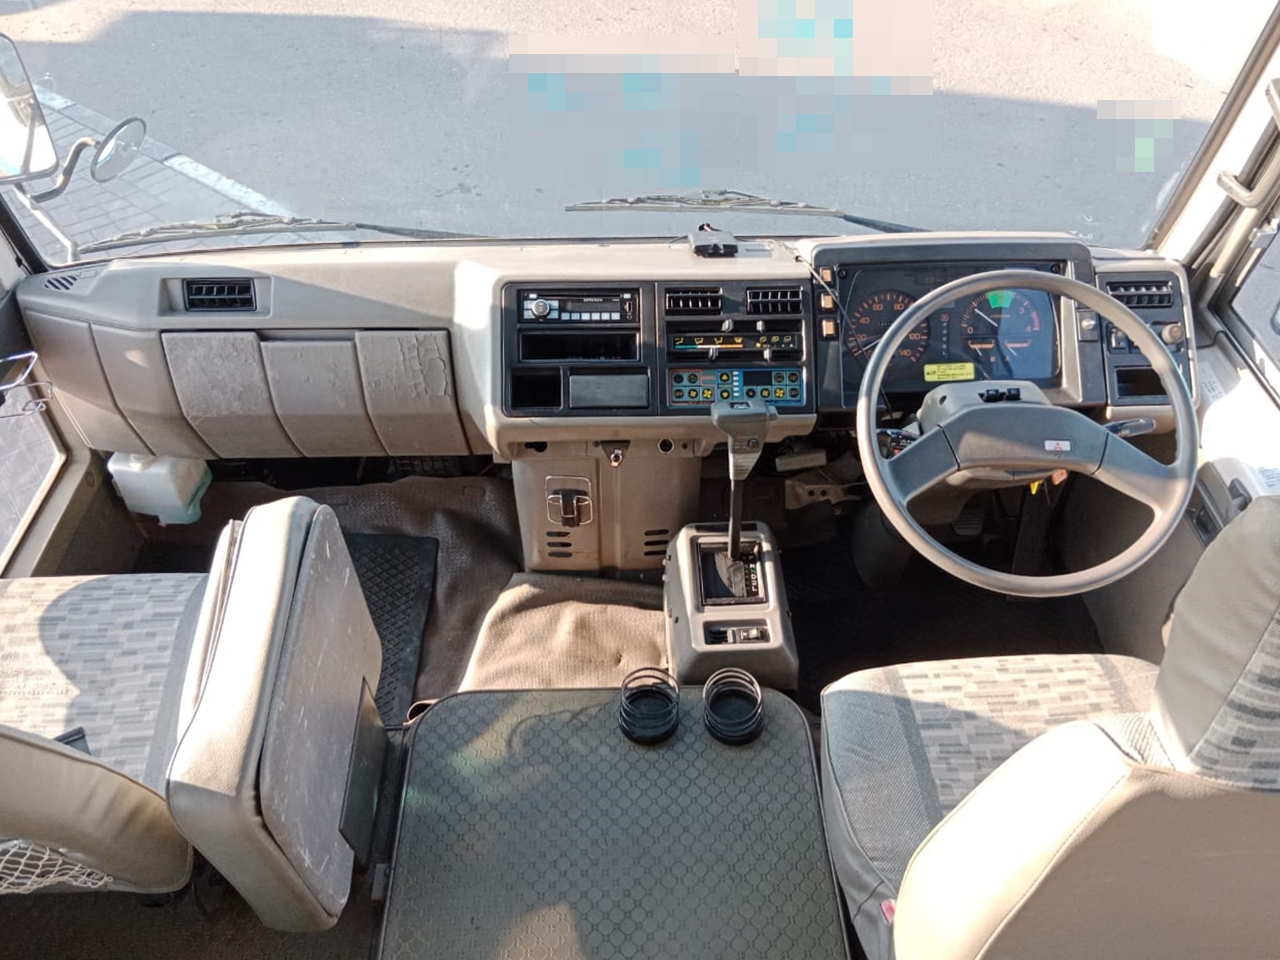 0416 MITSUBISHI ROSA BUS 4.2 2WD A/T OTHER